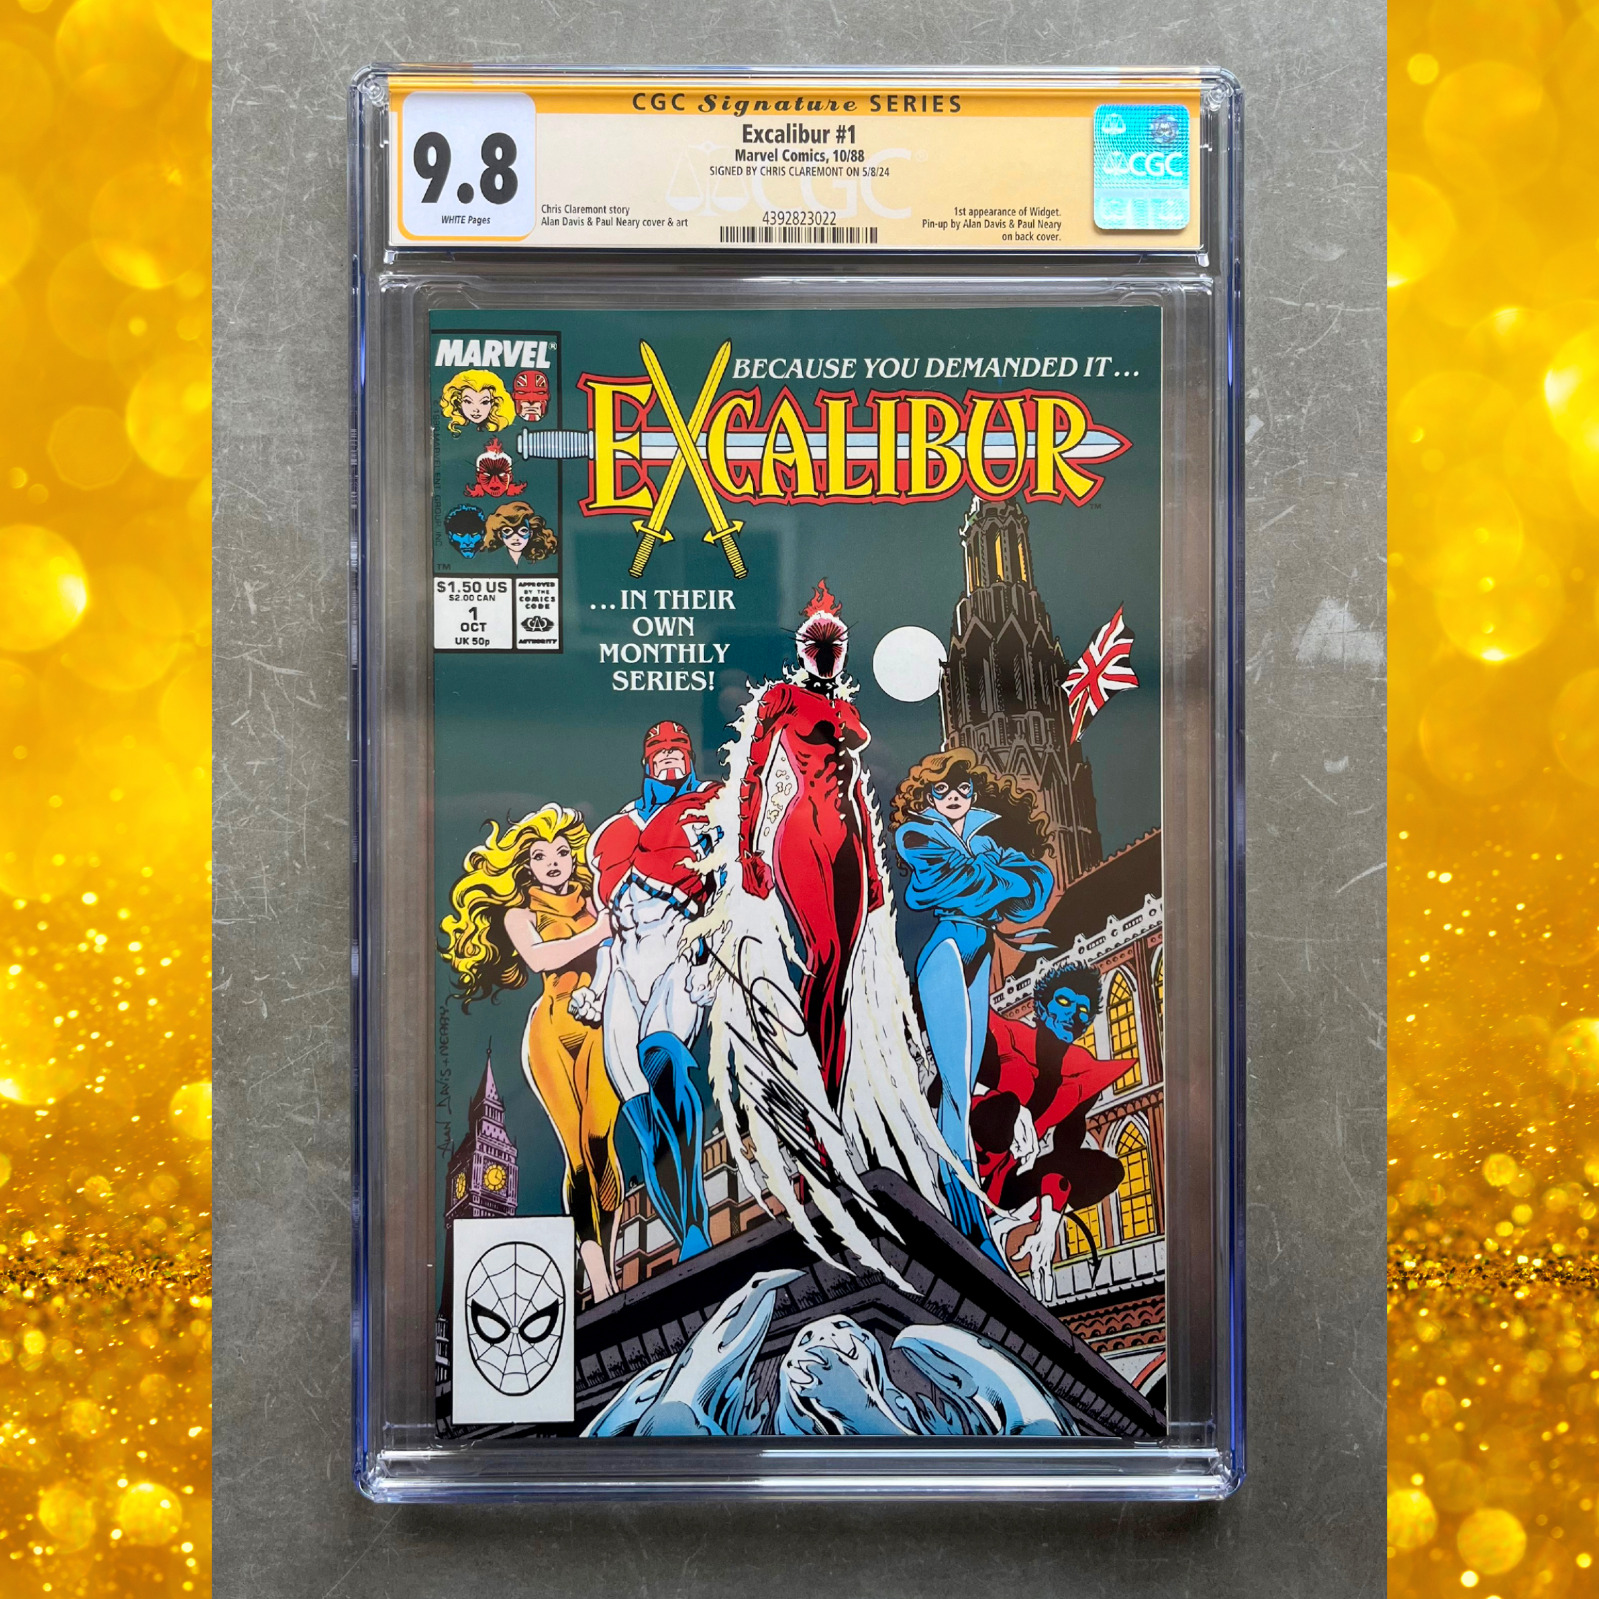 🔥 Excalibur #1 CGC 9.8 Signed by Chris Claremont 1st Appearance of Widget 🔥